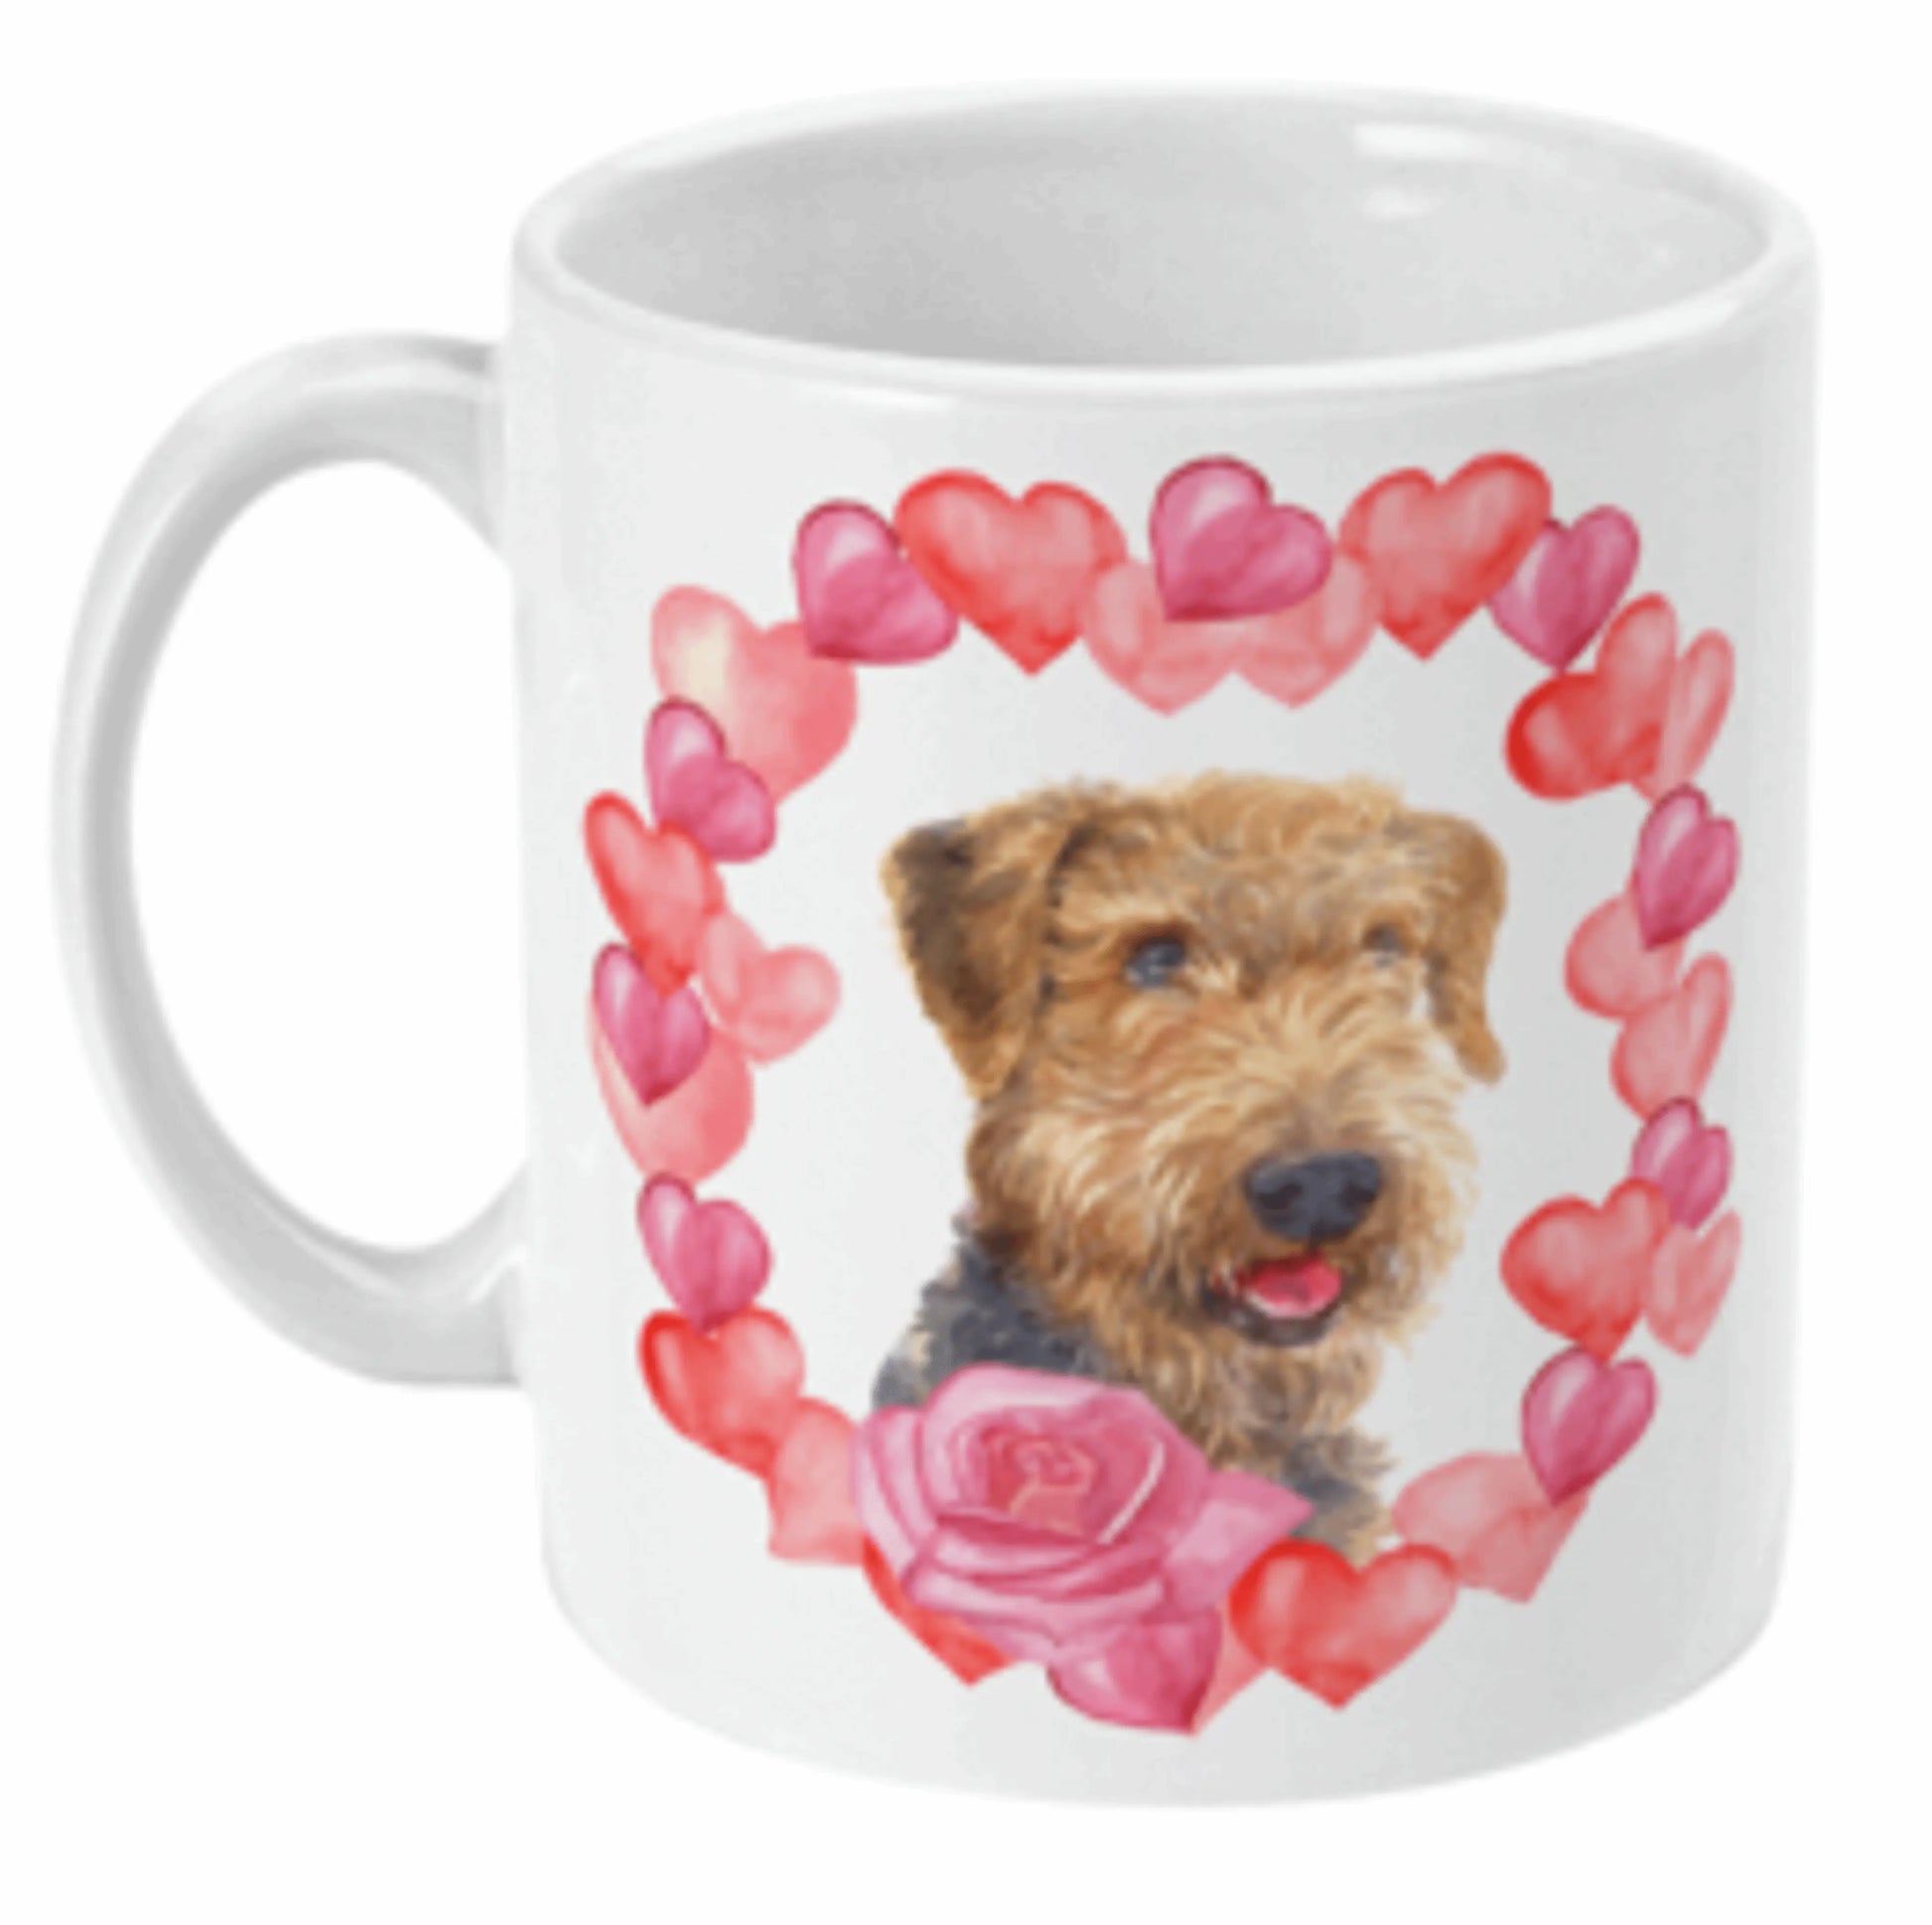  Airedale Terrier Dog Wreath Coffee Mug by Free Spirit Accessories sold by Free Spirit Accessories